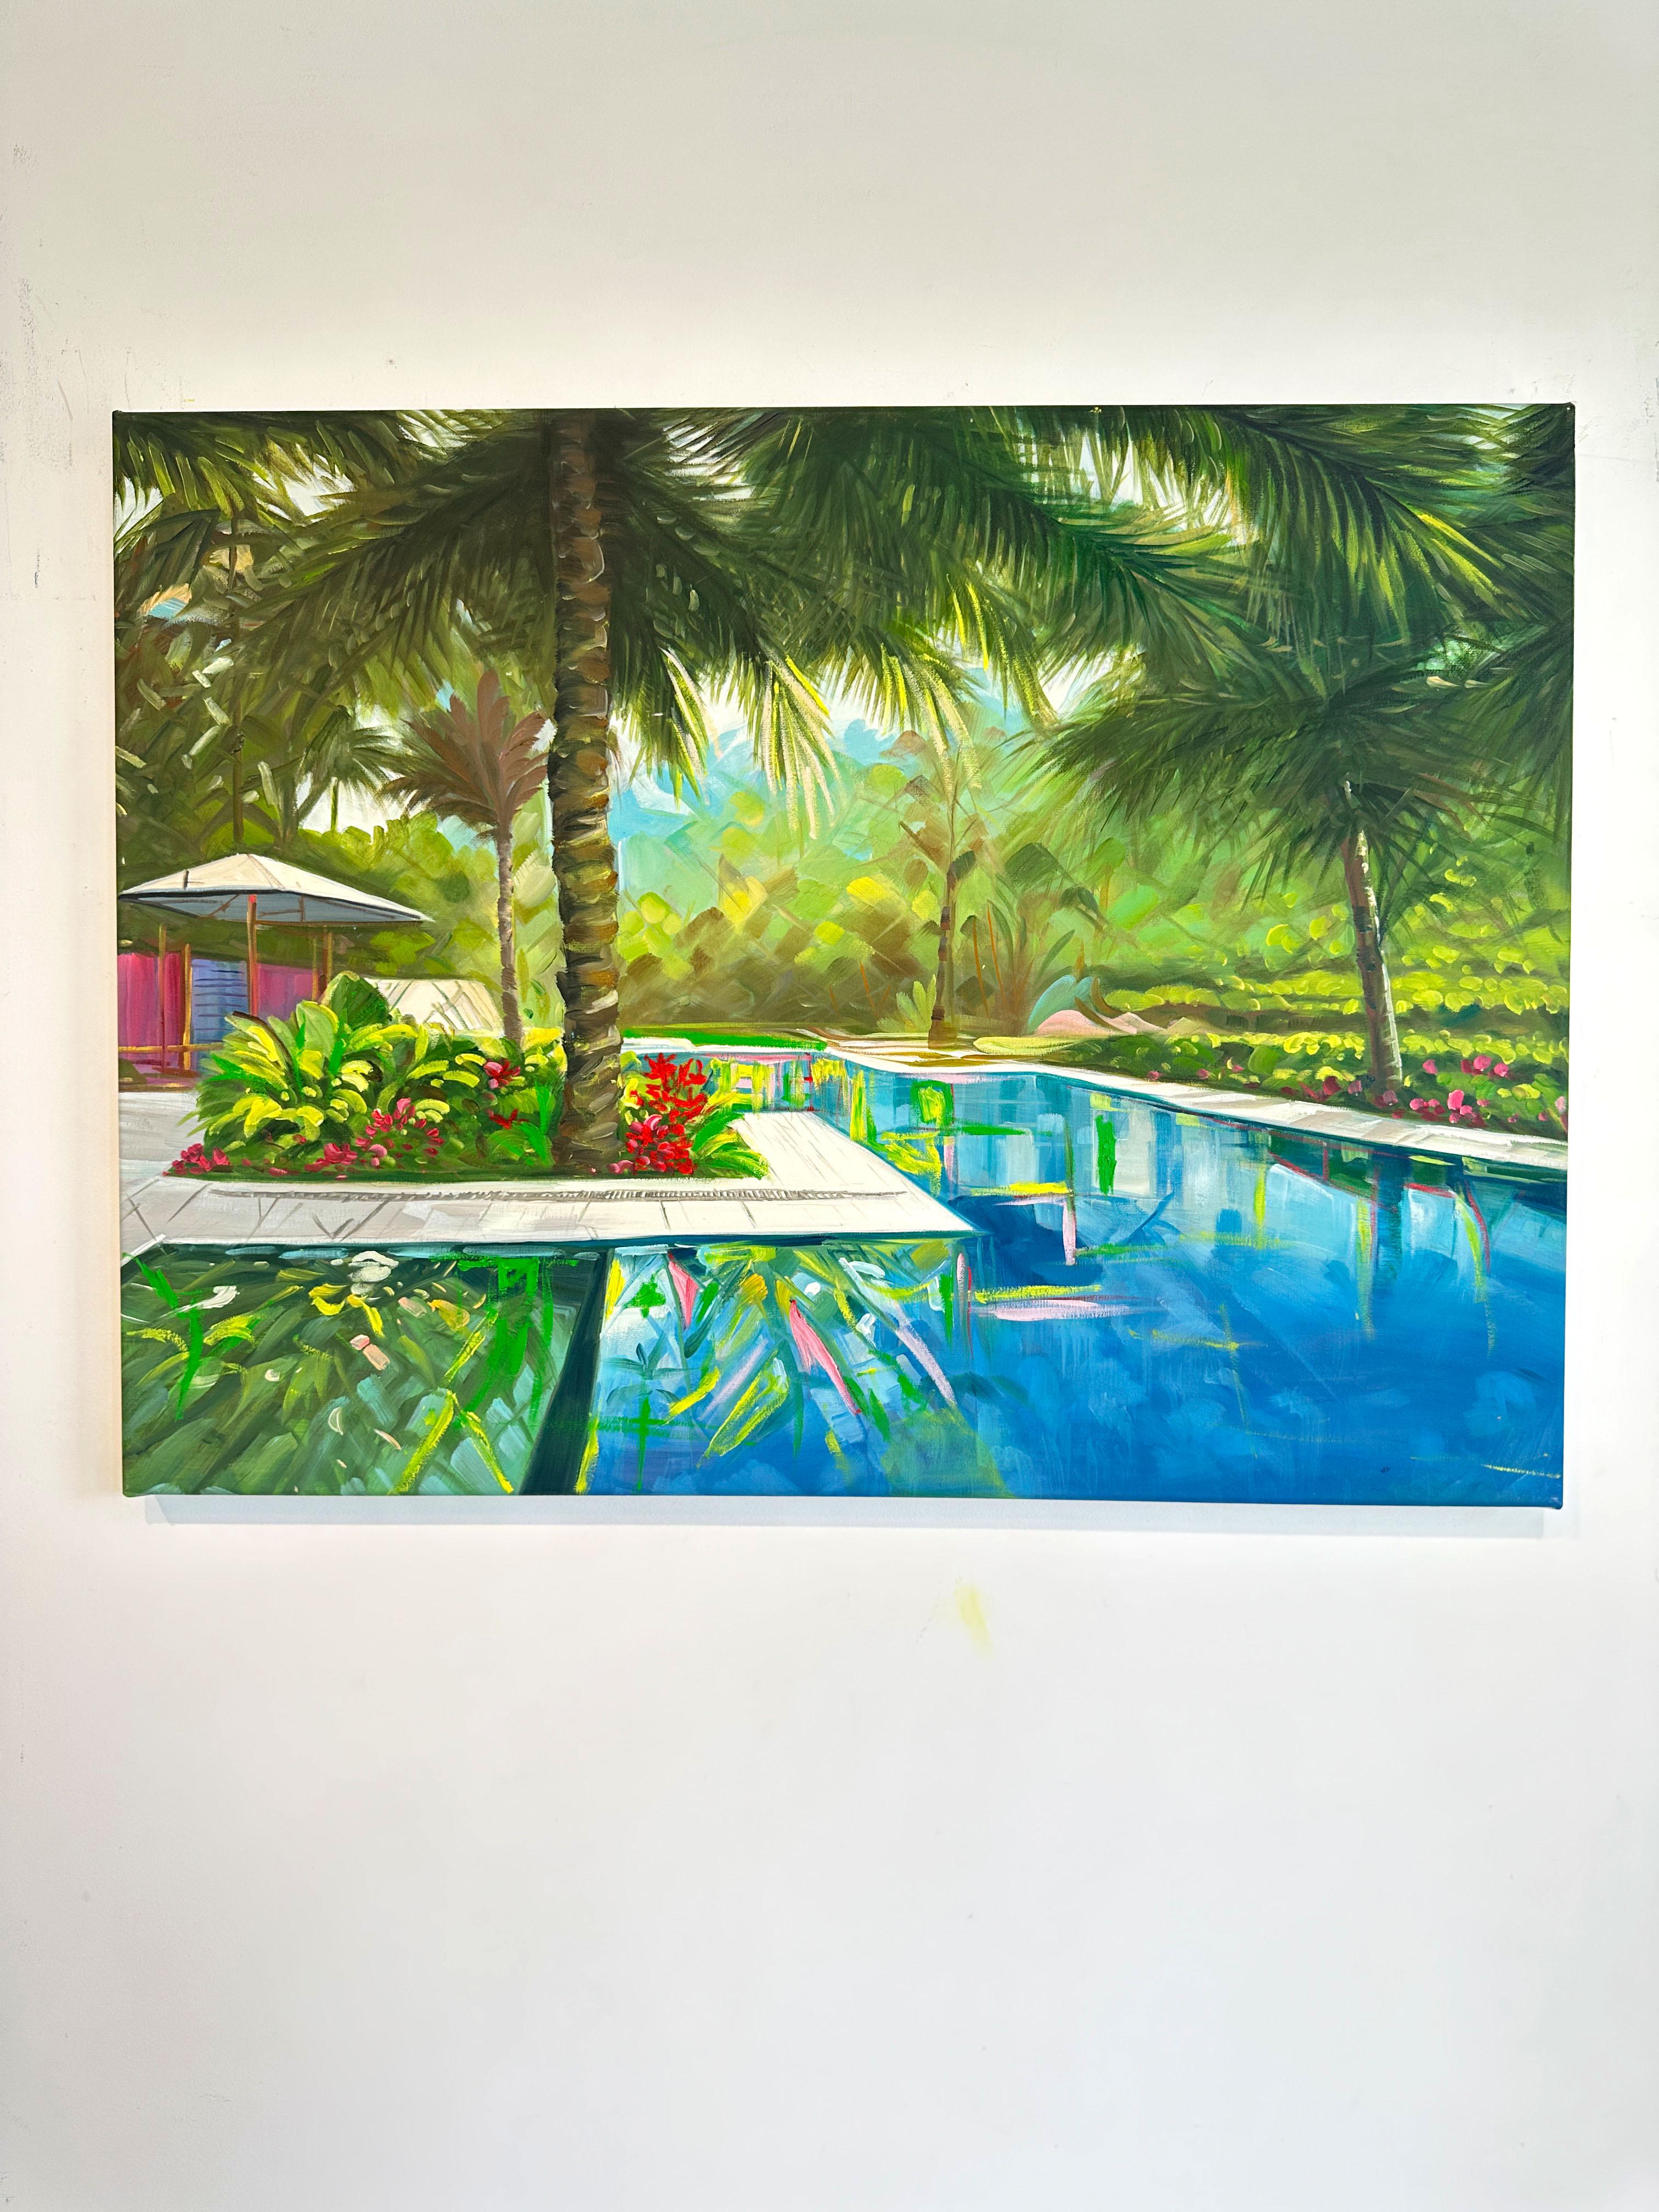 Let's Meet at the Pool - Contemporary Architecture Villa Ölgemälde – Painting von Lilly Muth